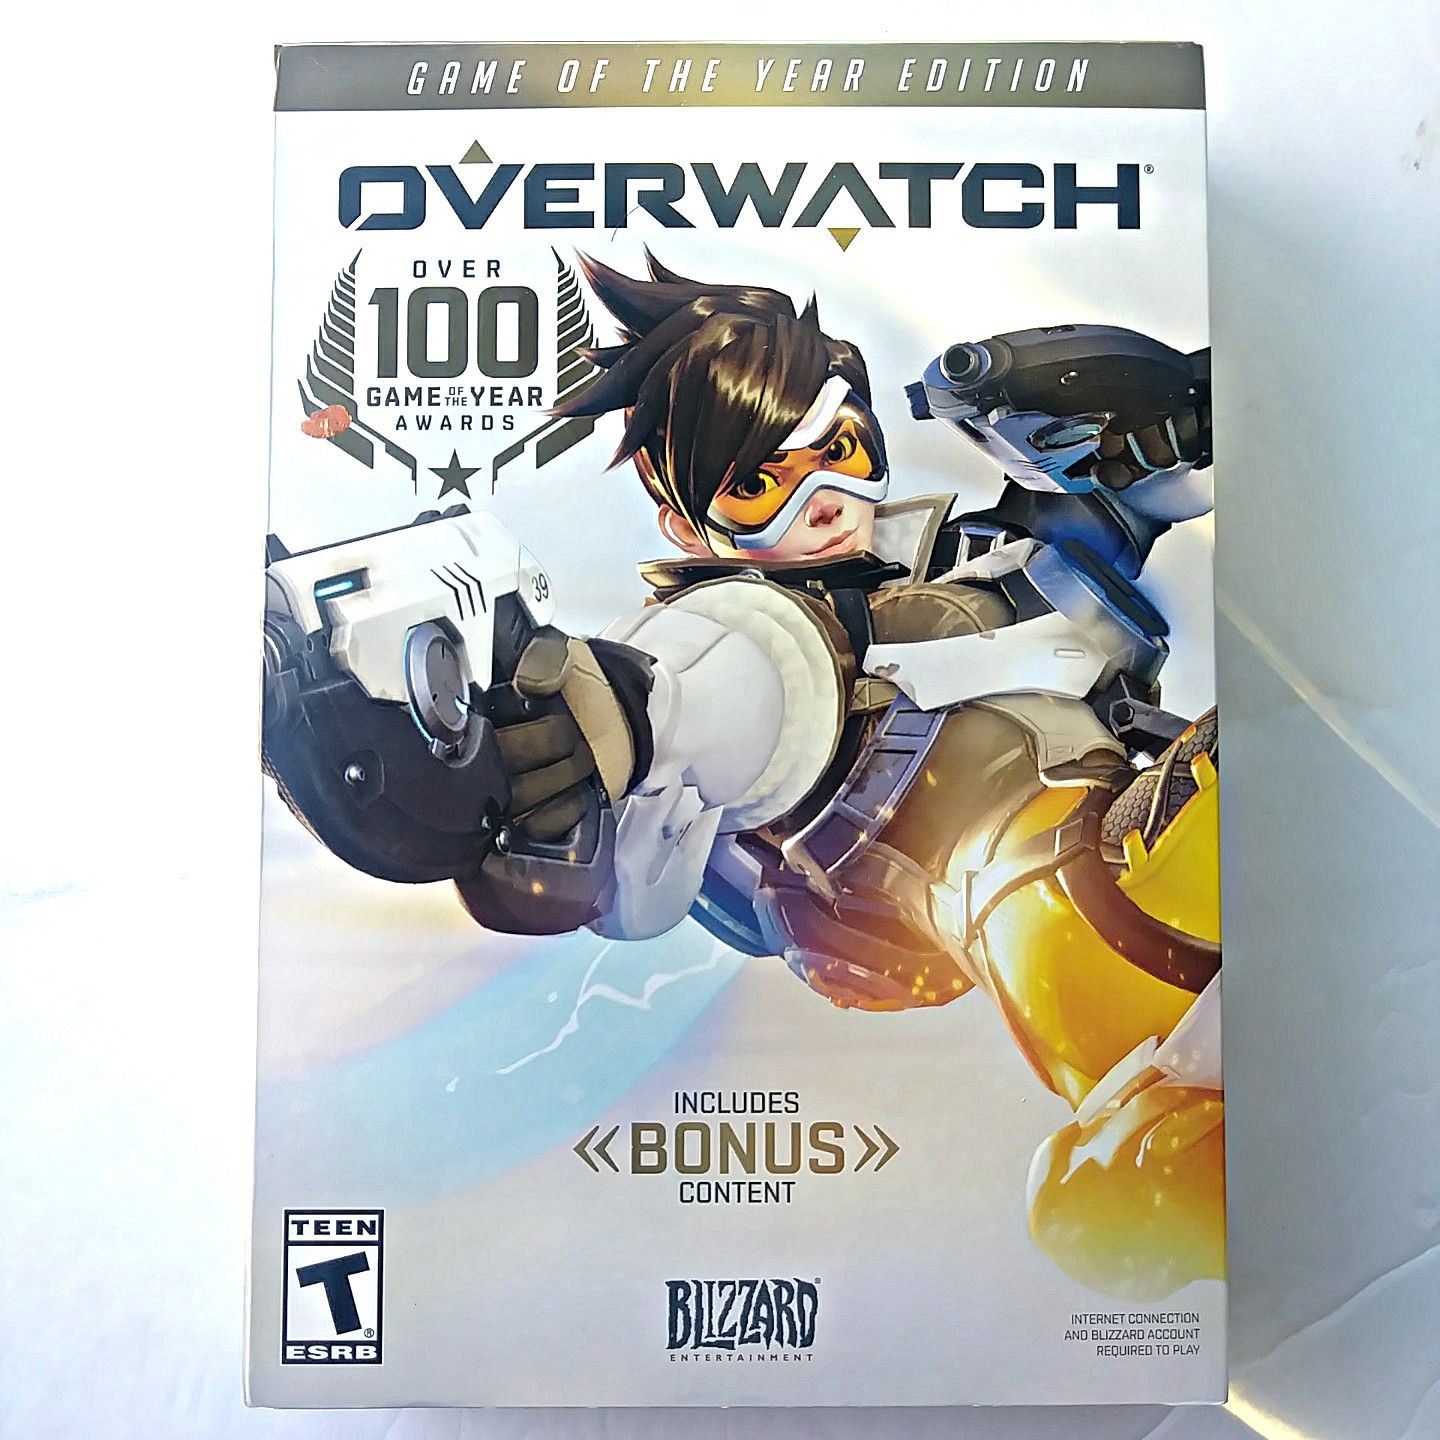 Overwatch Game of the Year Edition PC WINDOWS BRAND NEW SEALED